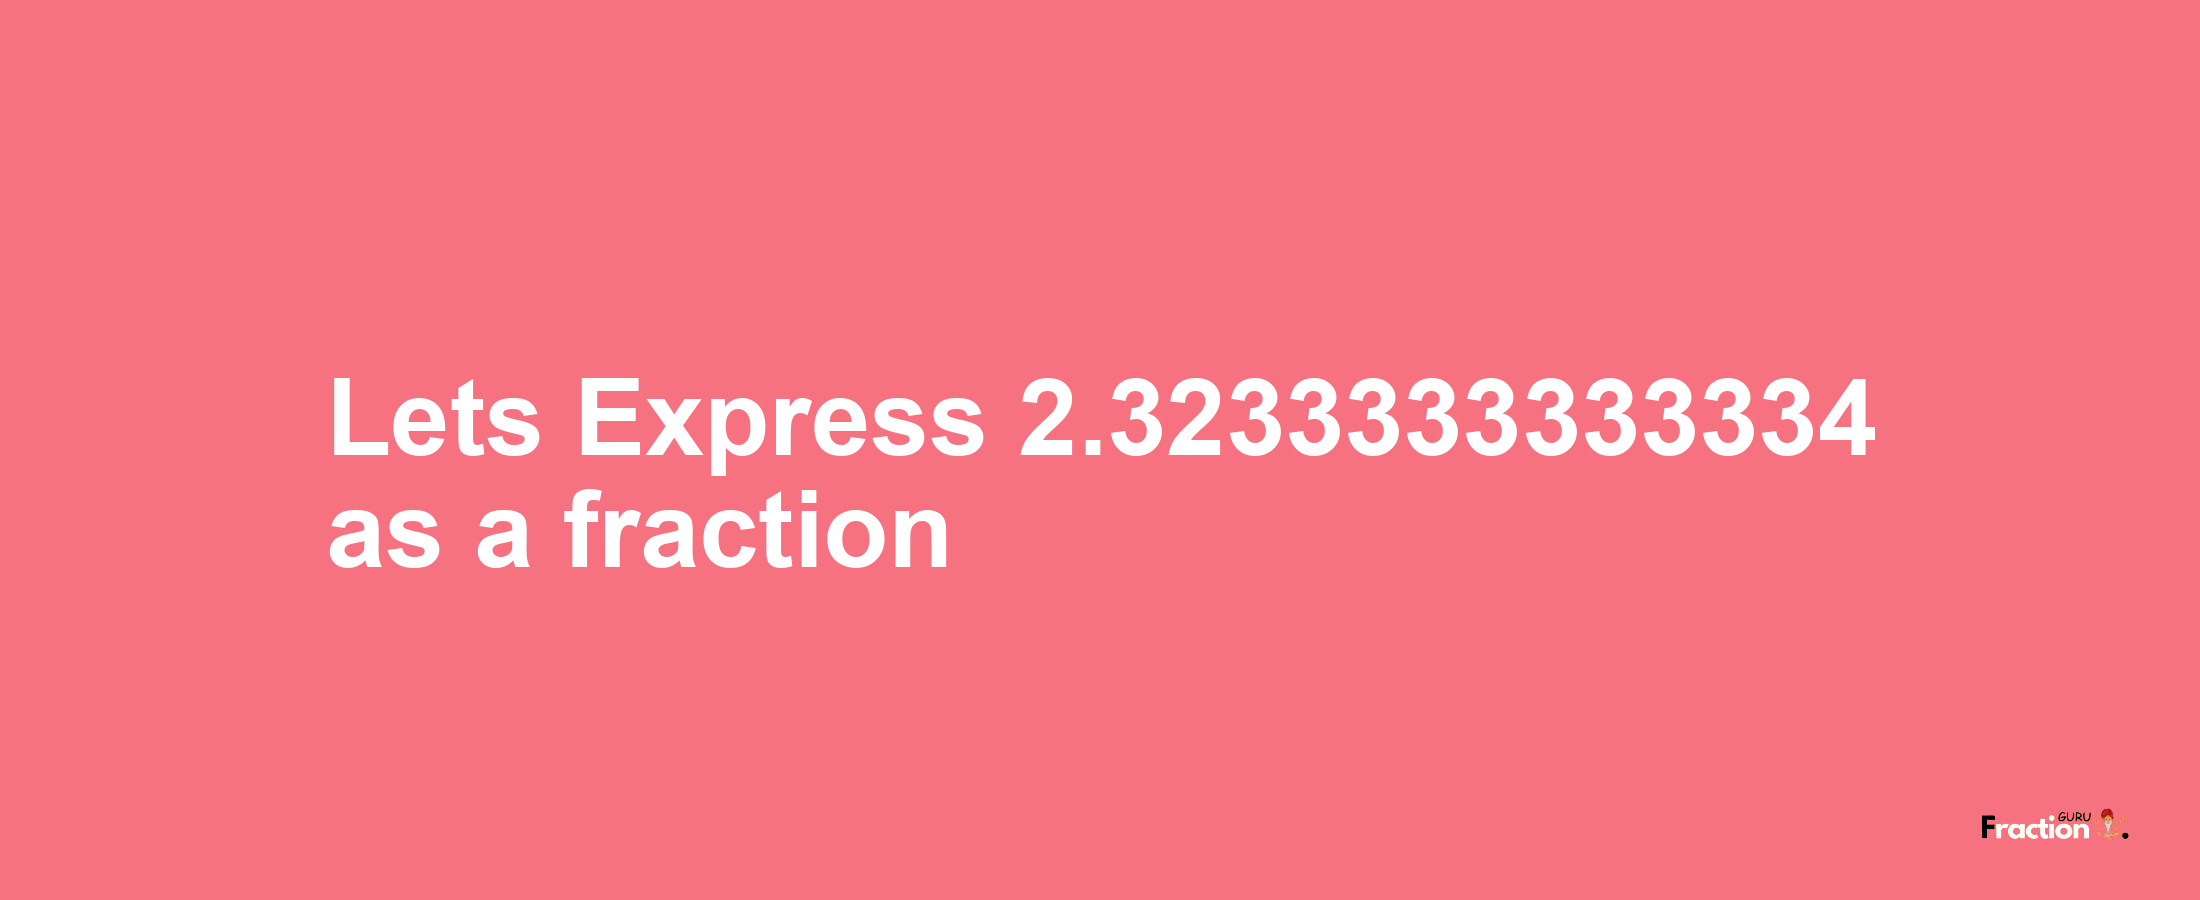 Lets Express 2.3233333333334 as afraction